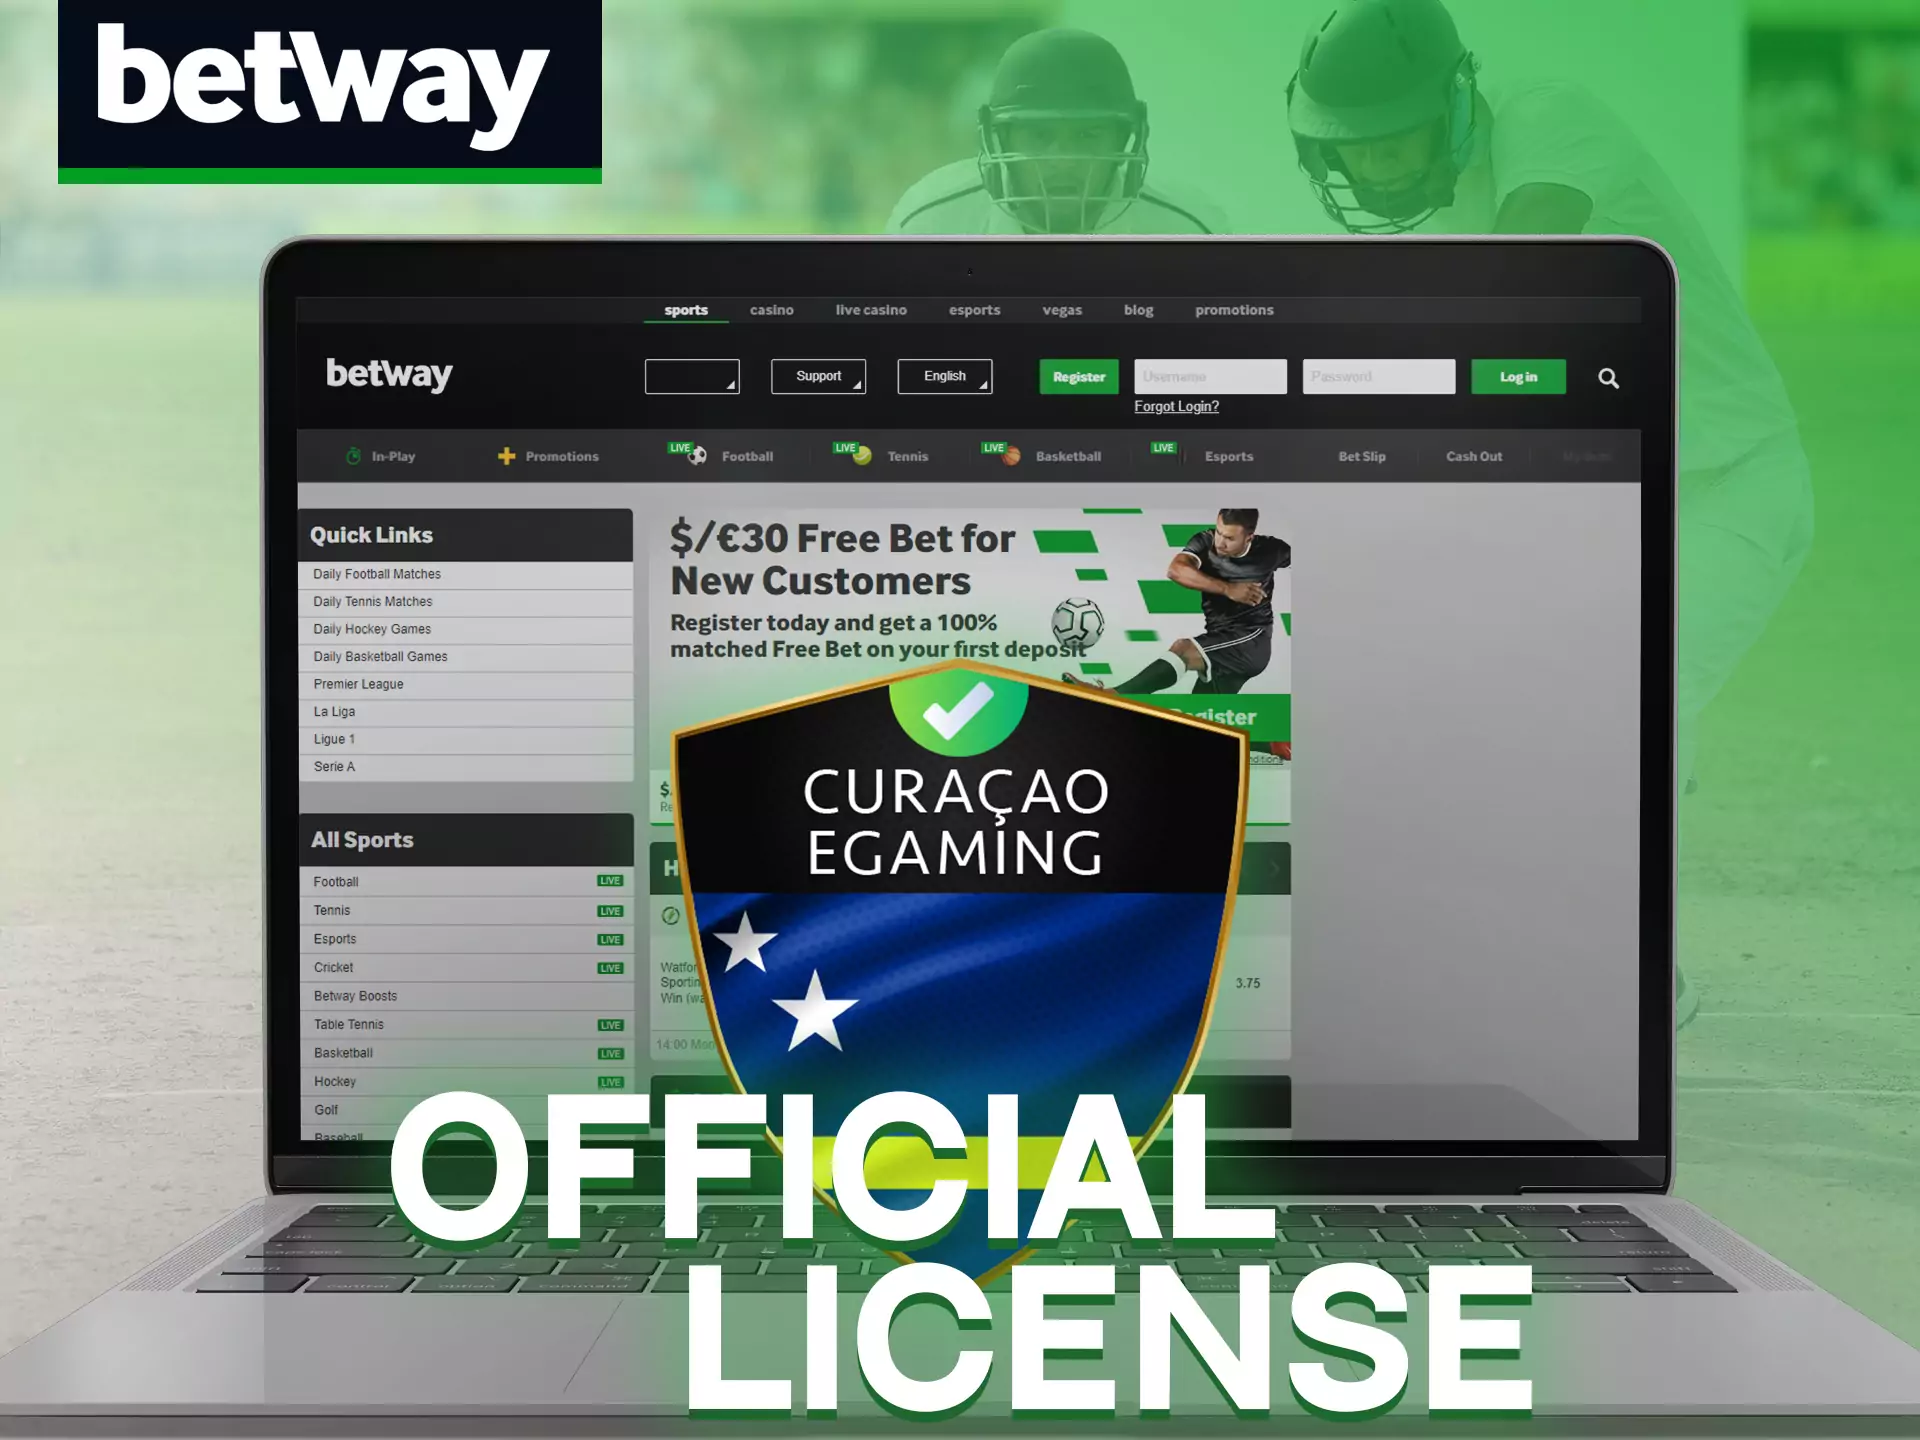 Betway follows all of the required licenses.